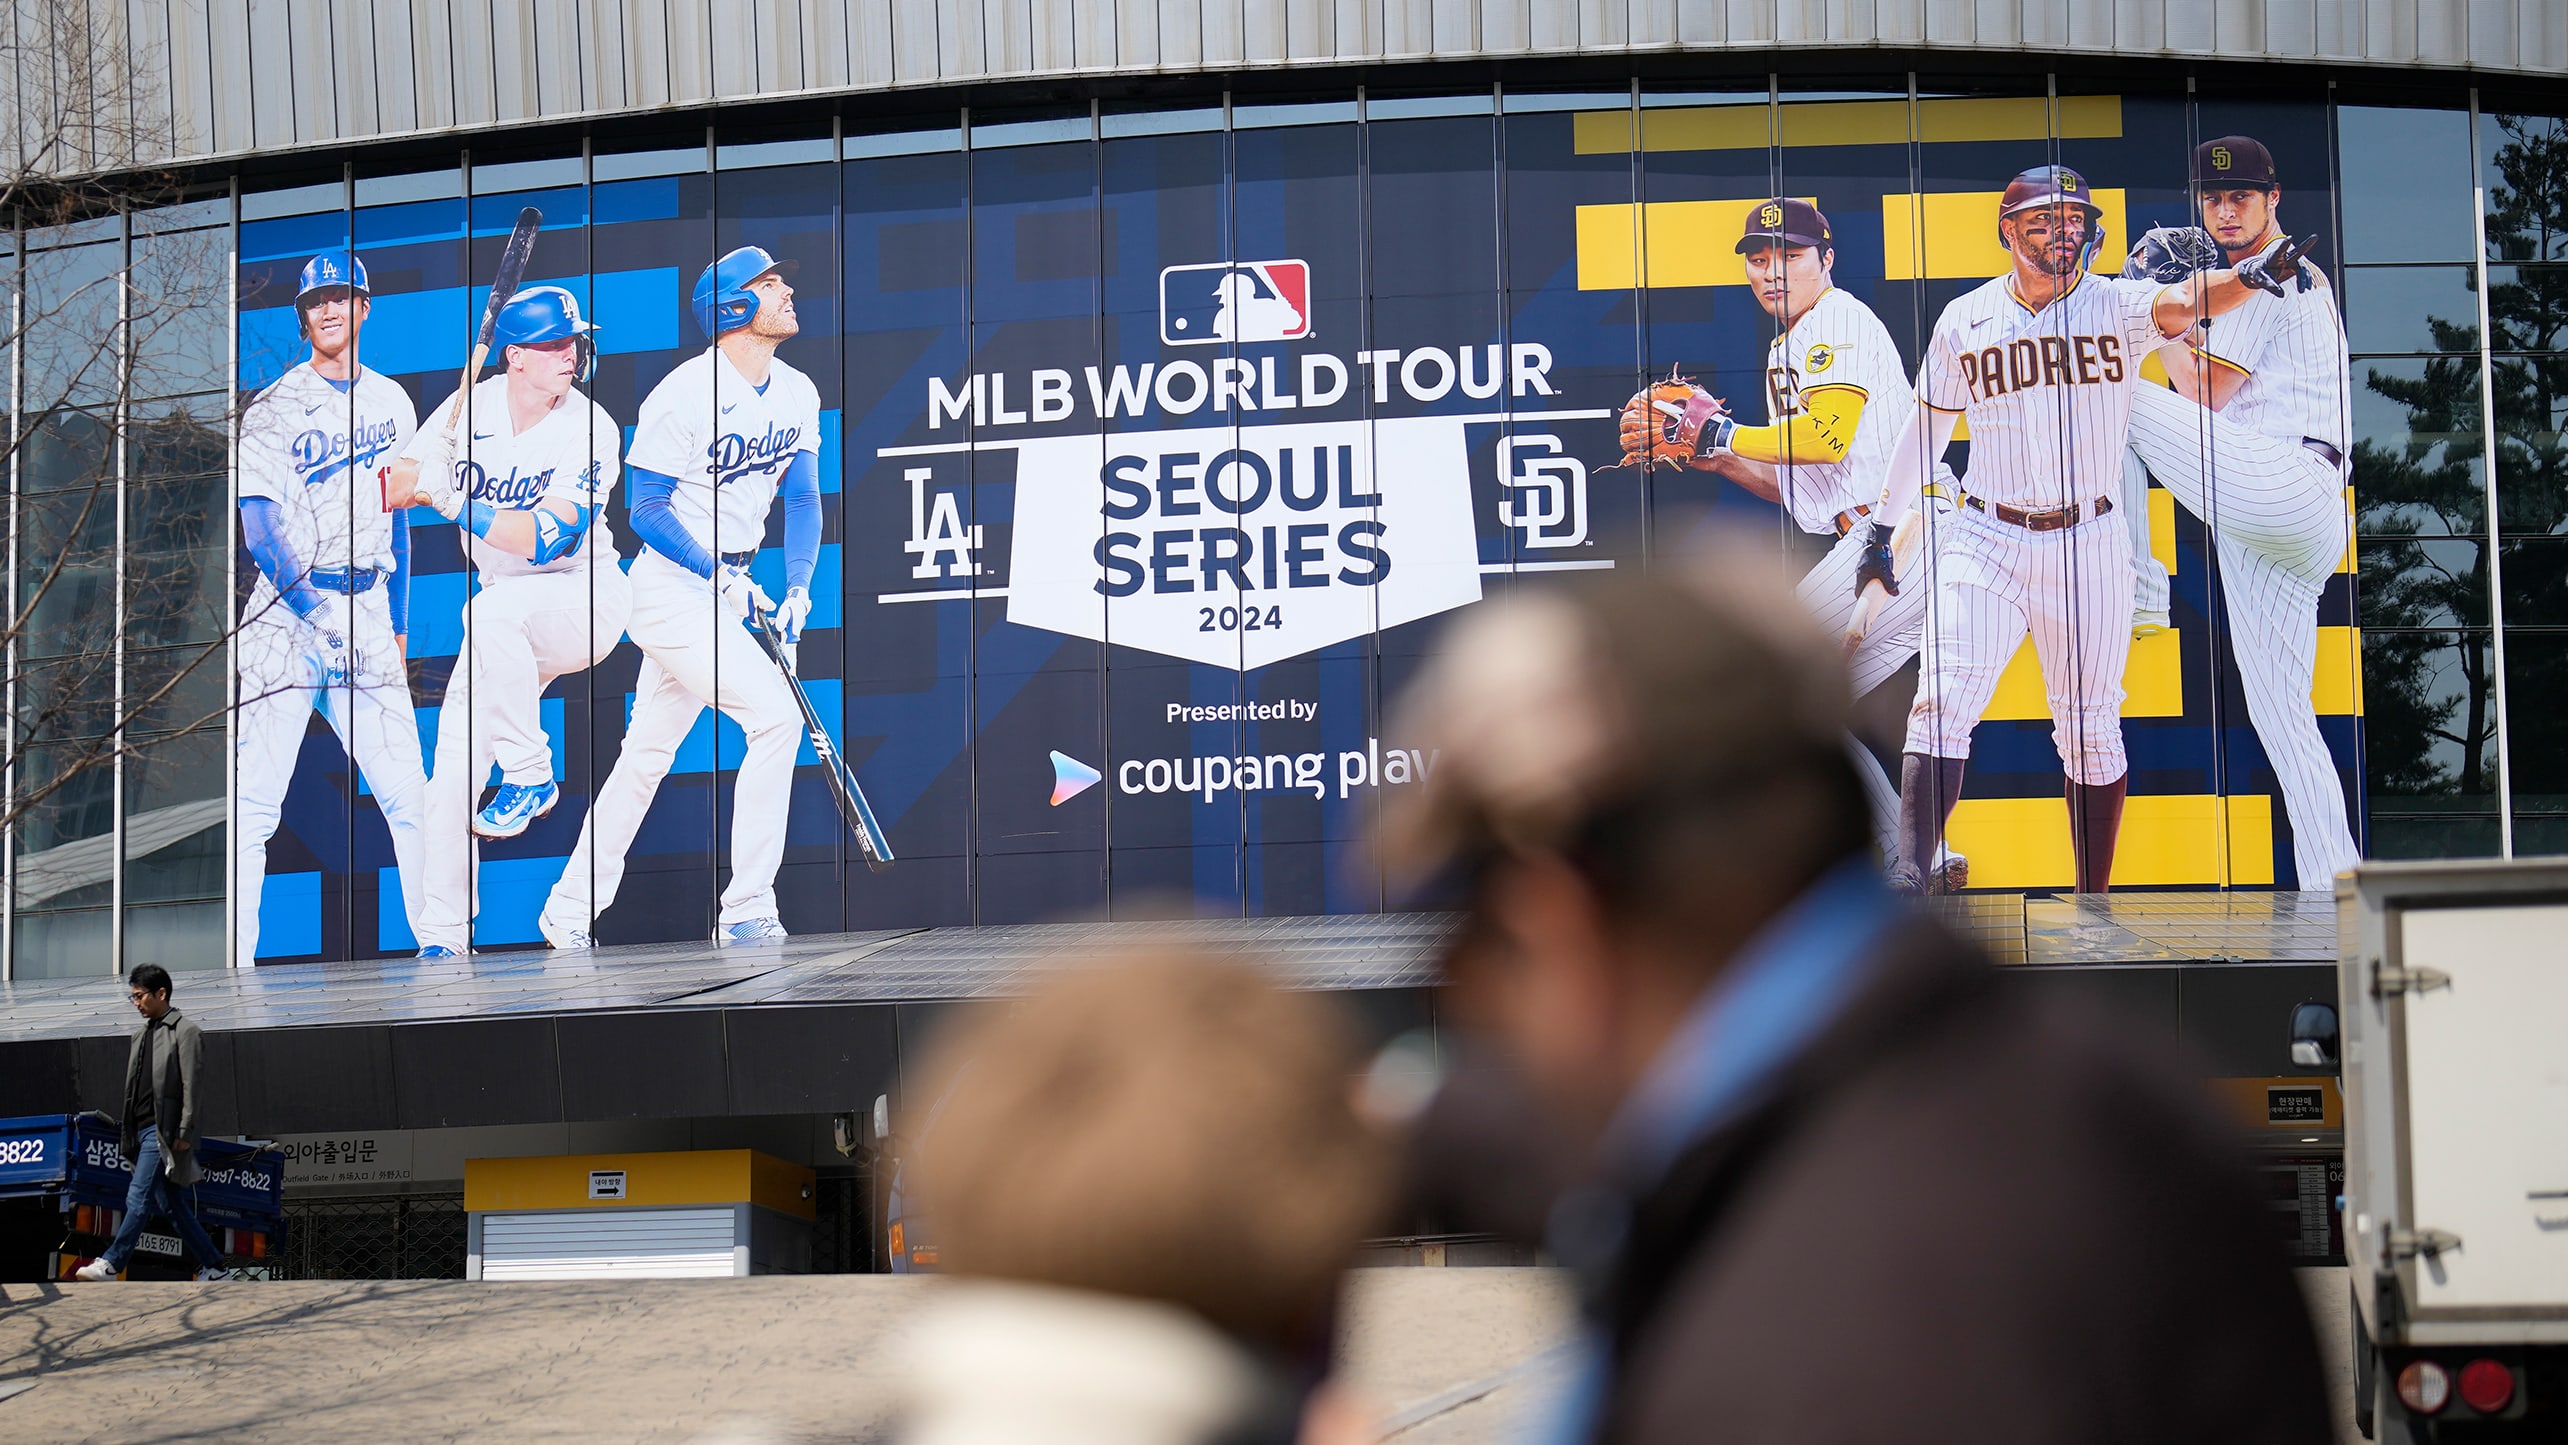 Seoul is ready for the Dodgers and Padres to open the 2024 MLB season